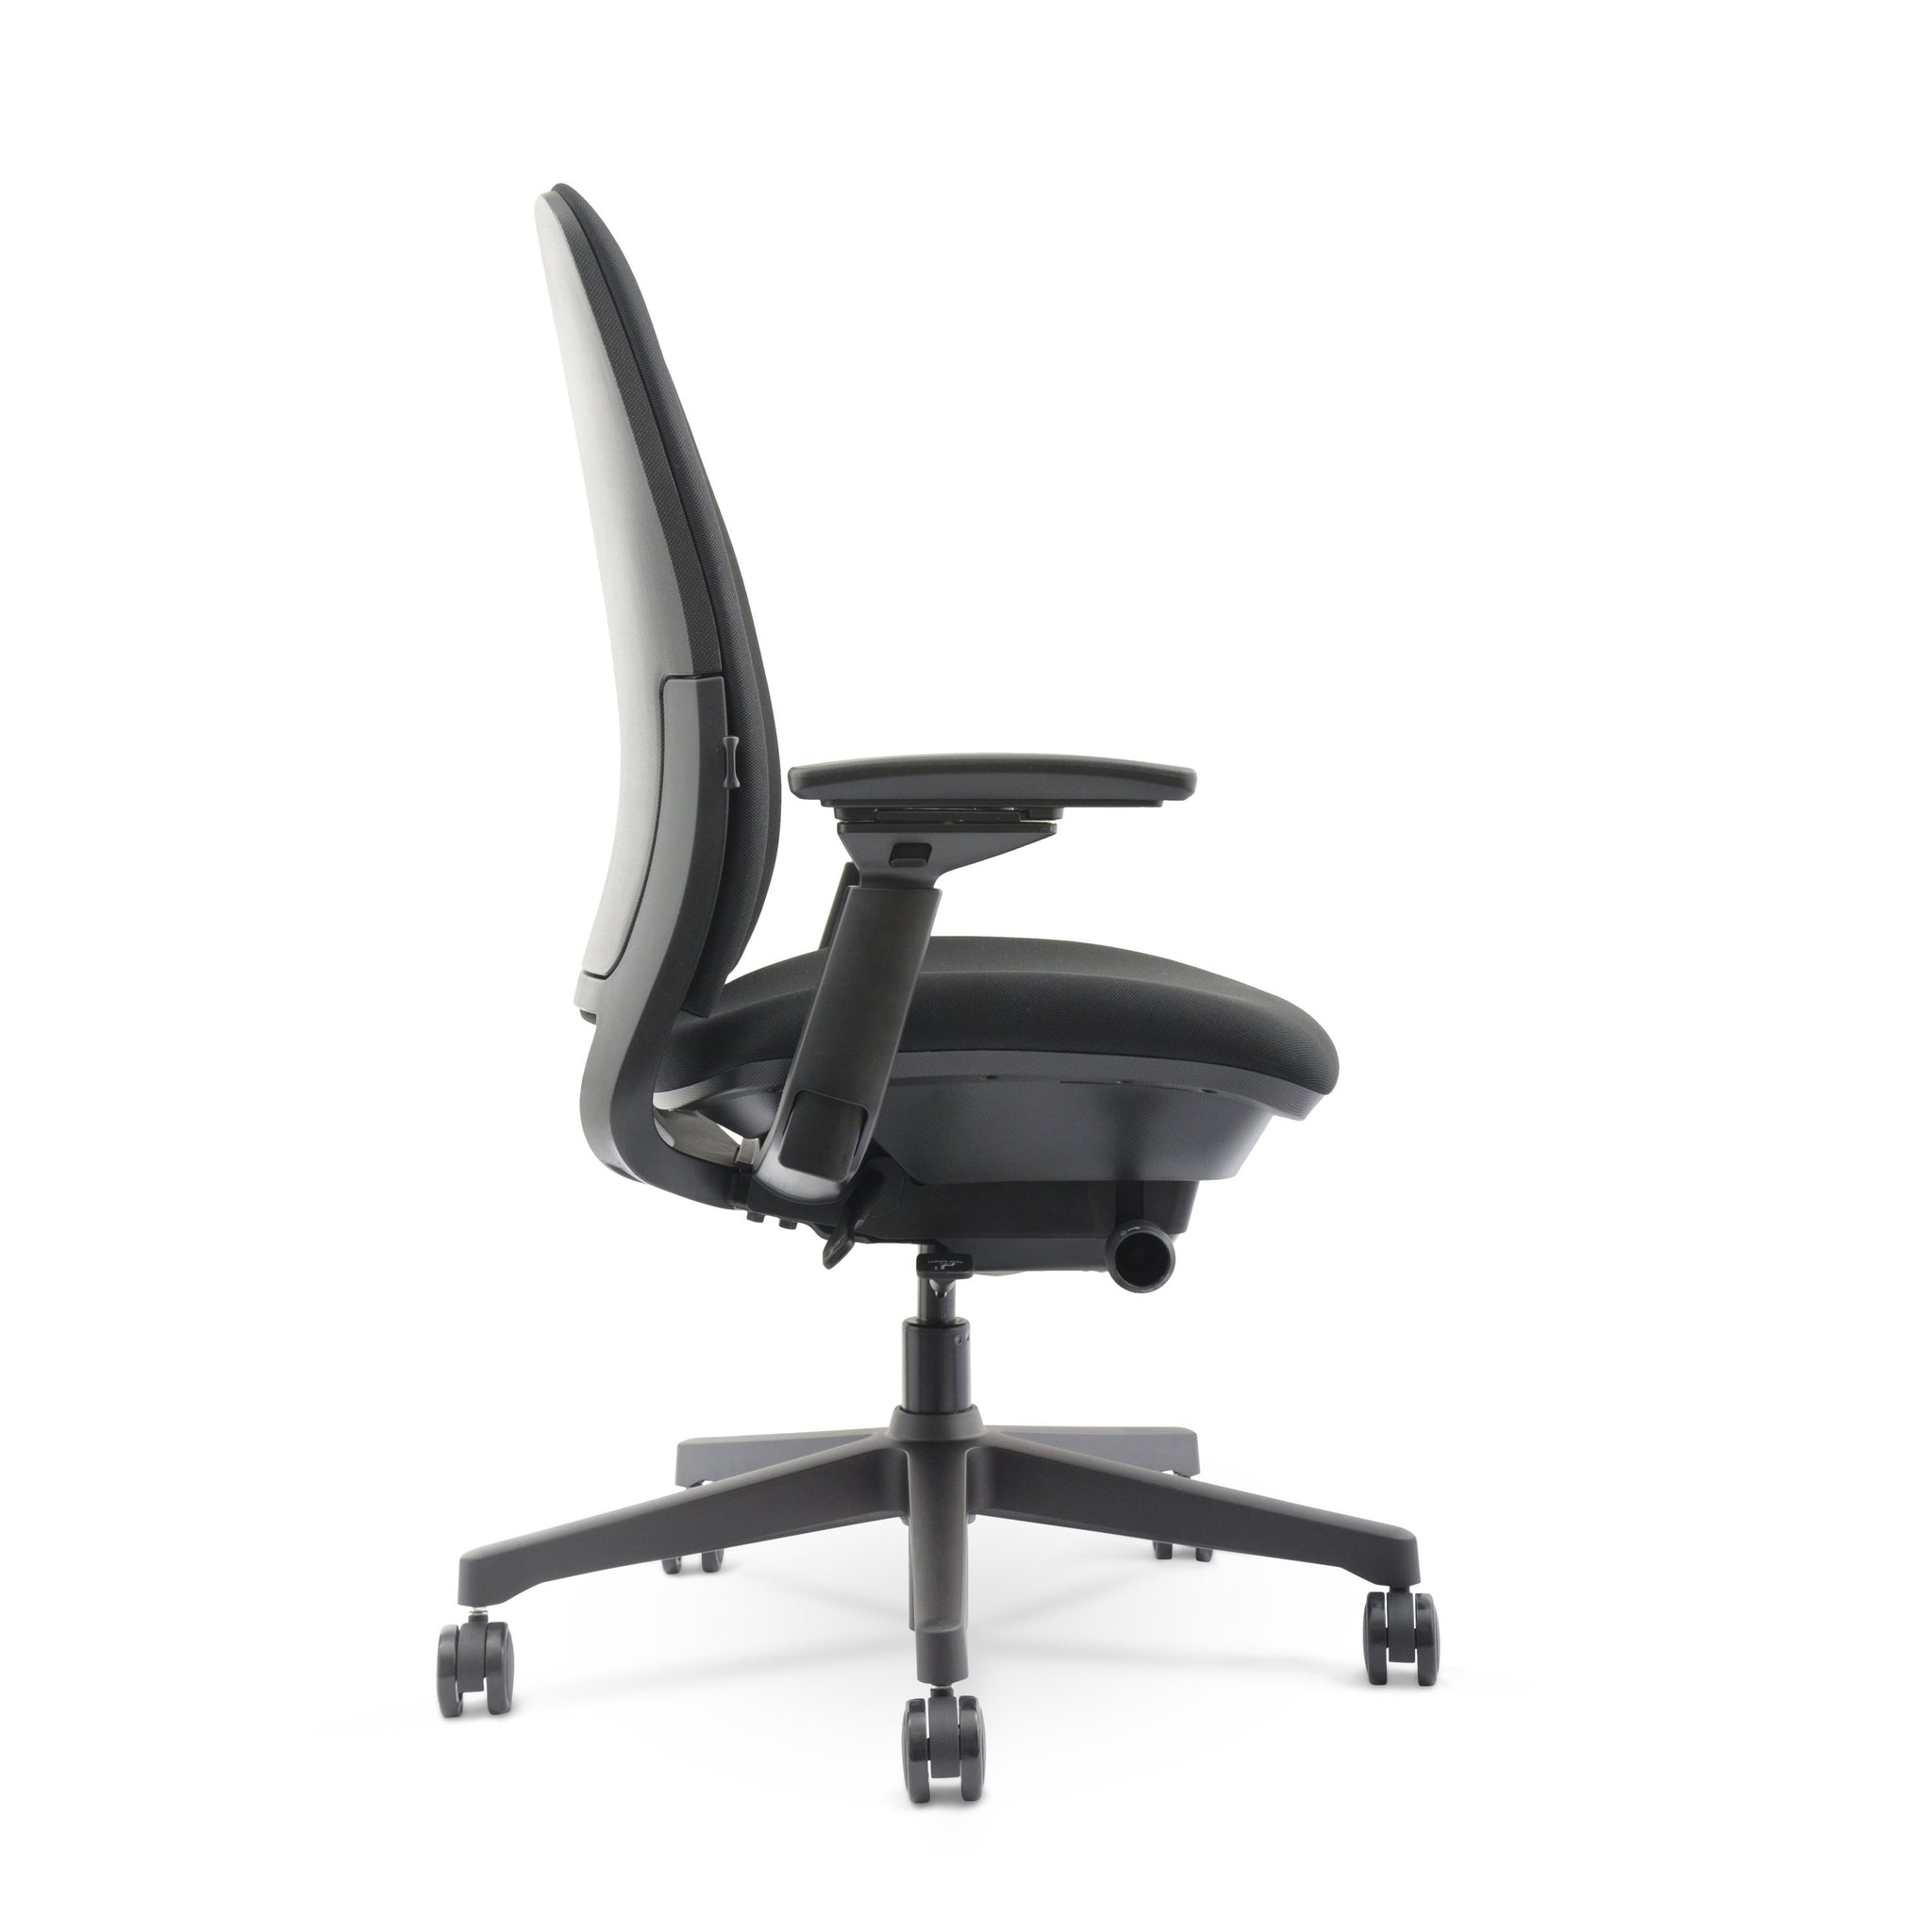  Used Steelcase Chairs Canada 